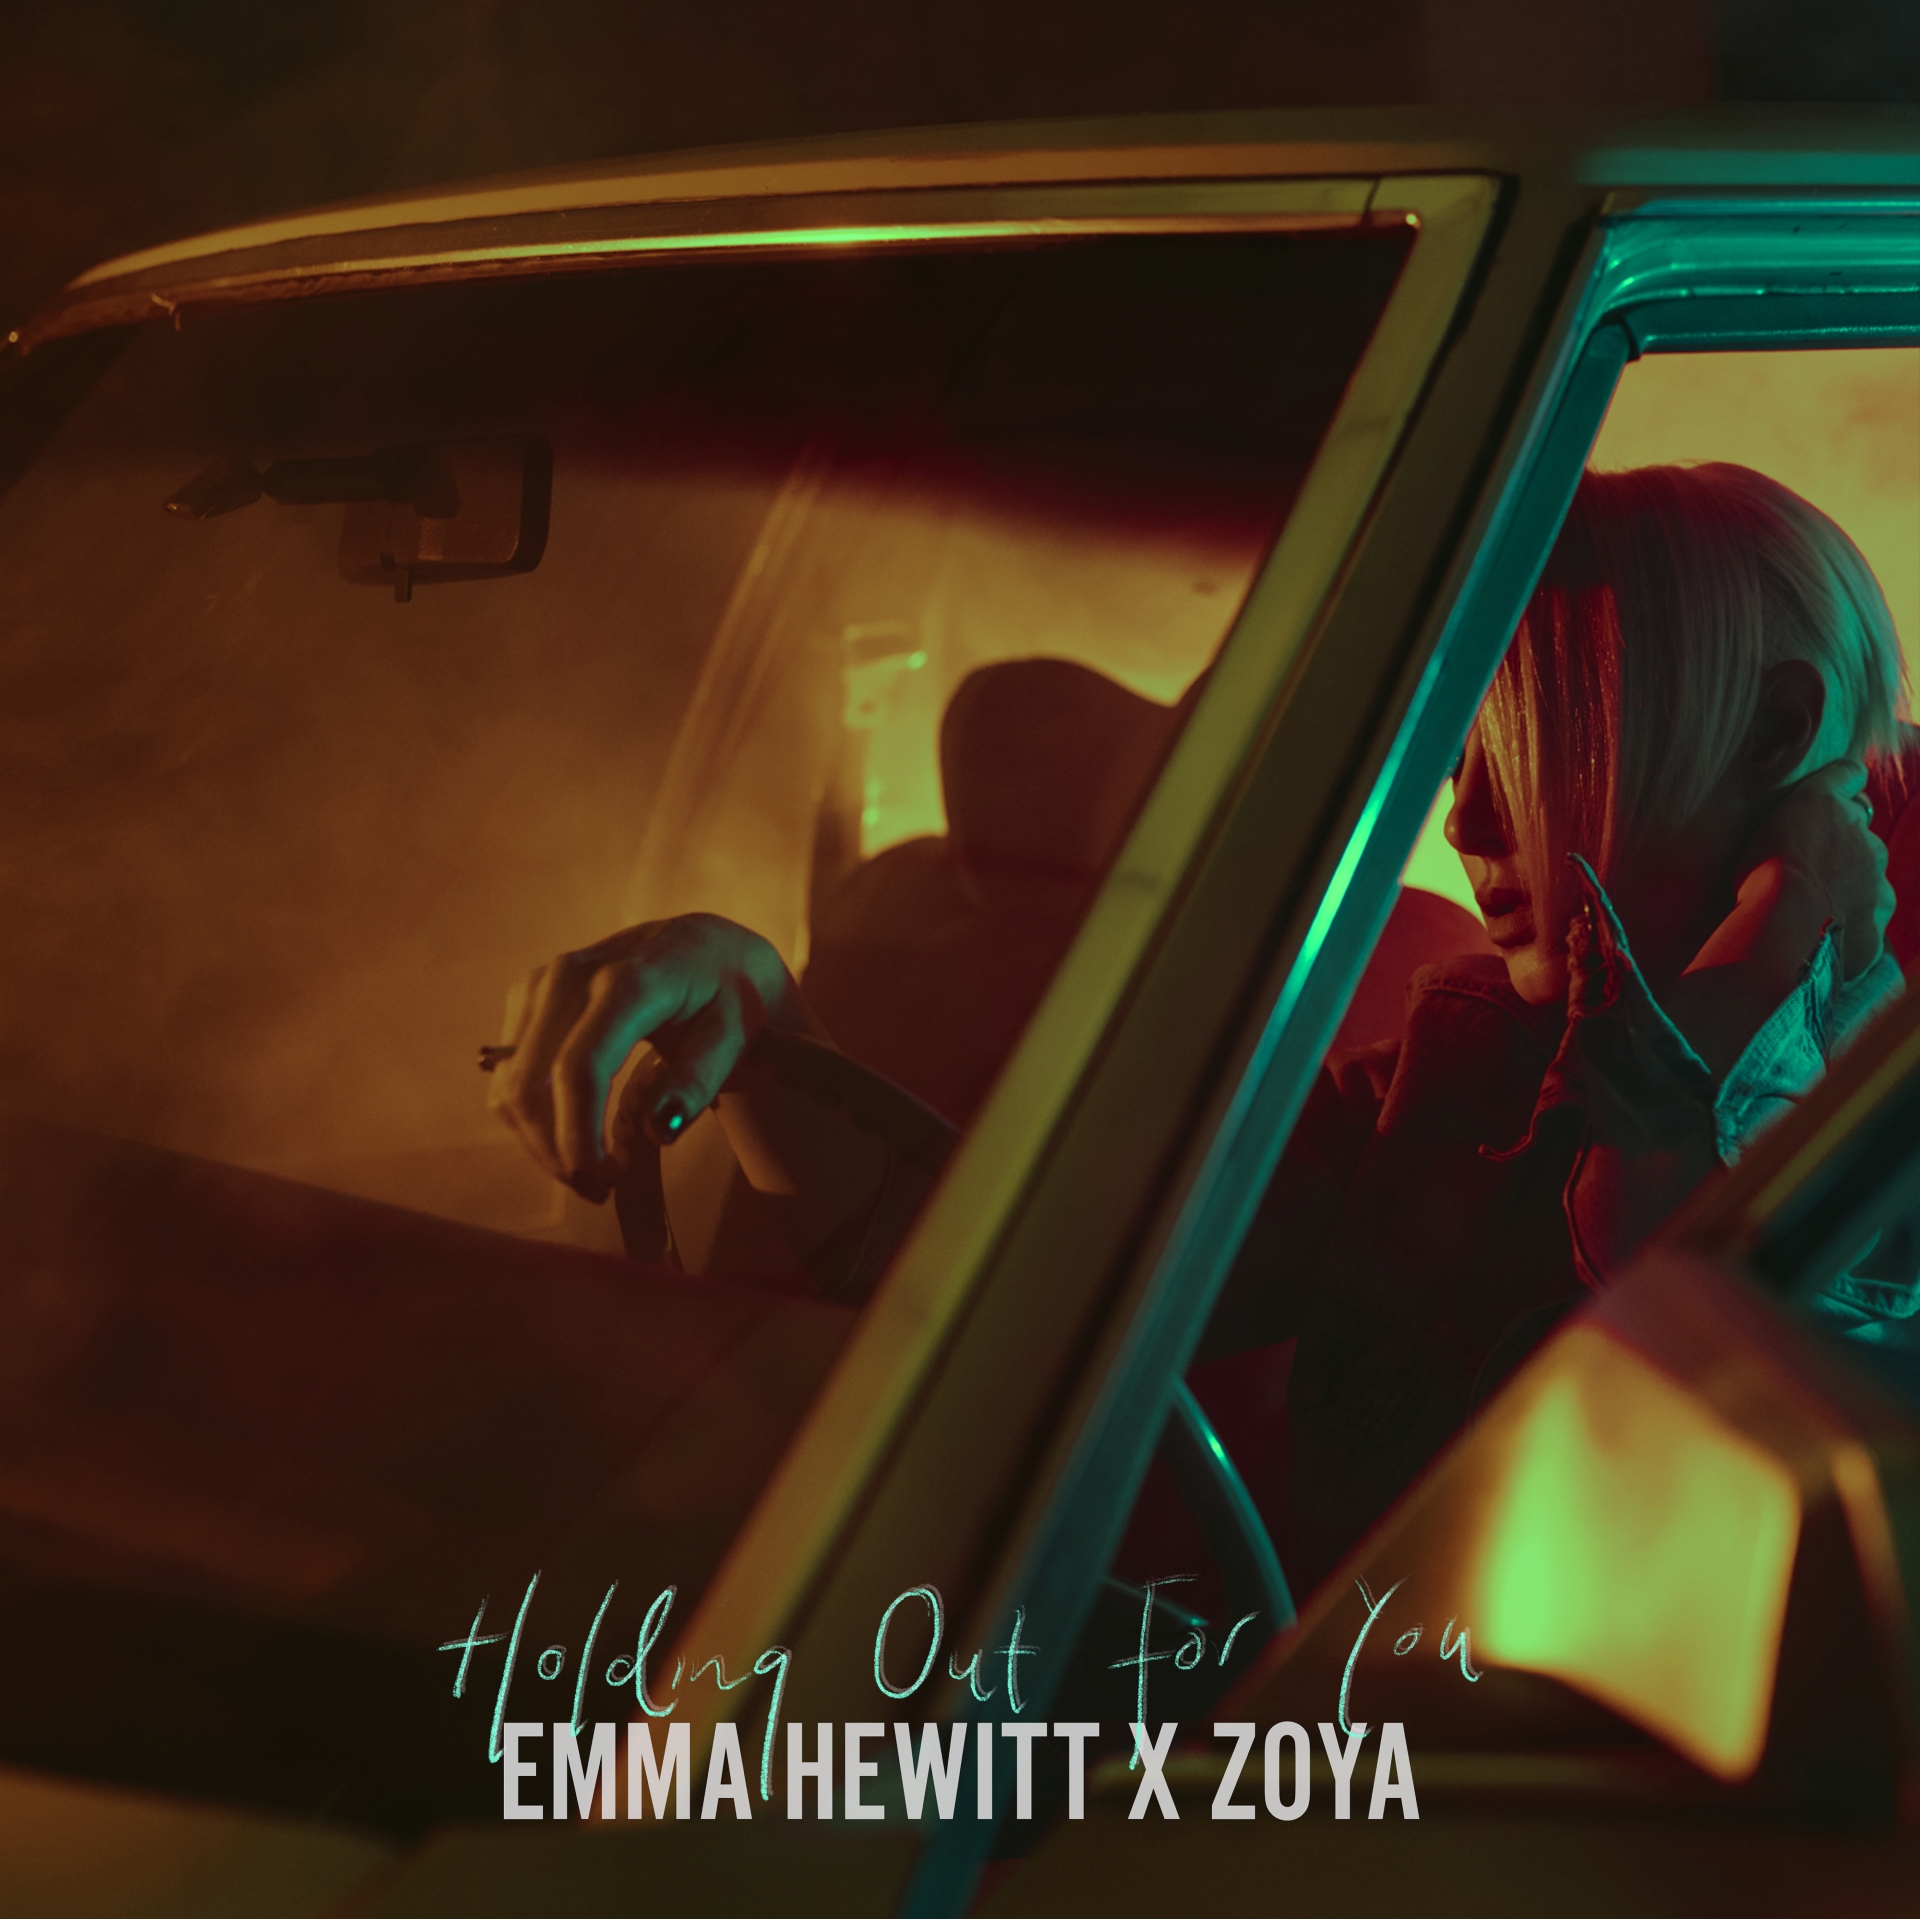 Emma Hewitt x ZOYA presents Holding Out For You on Black Hole Recordings